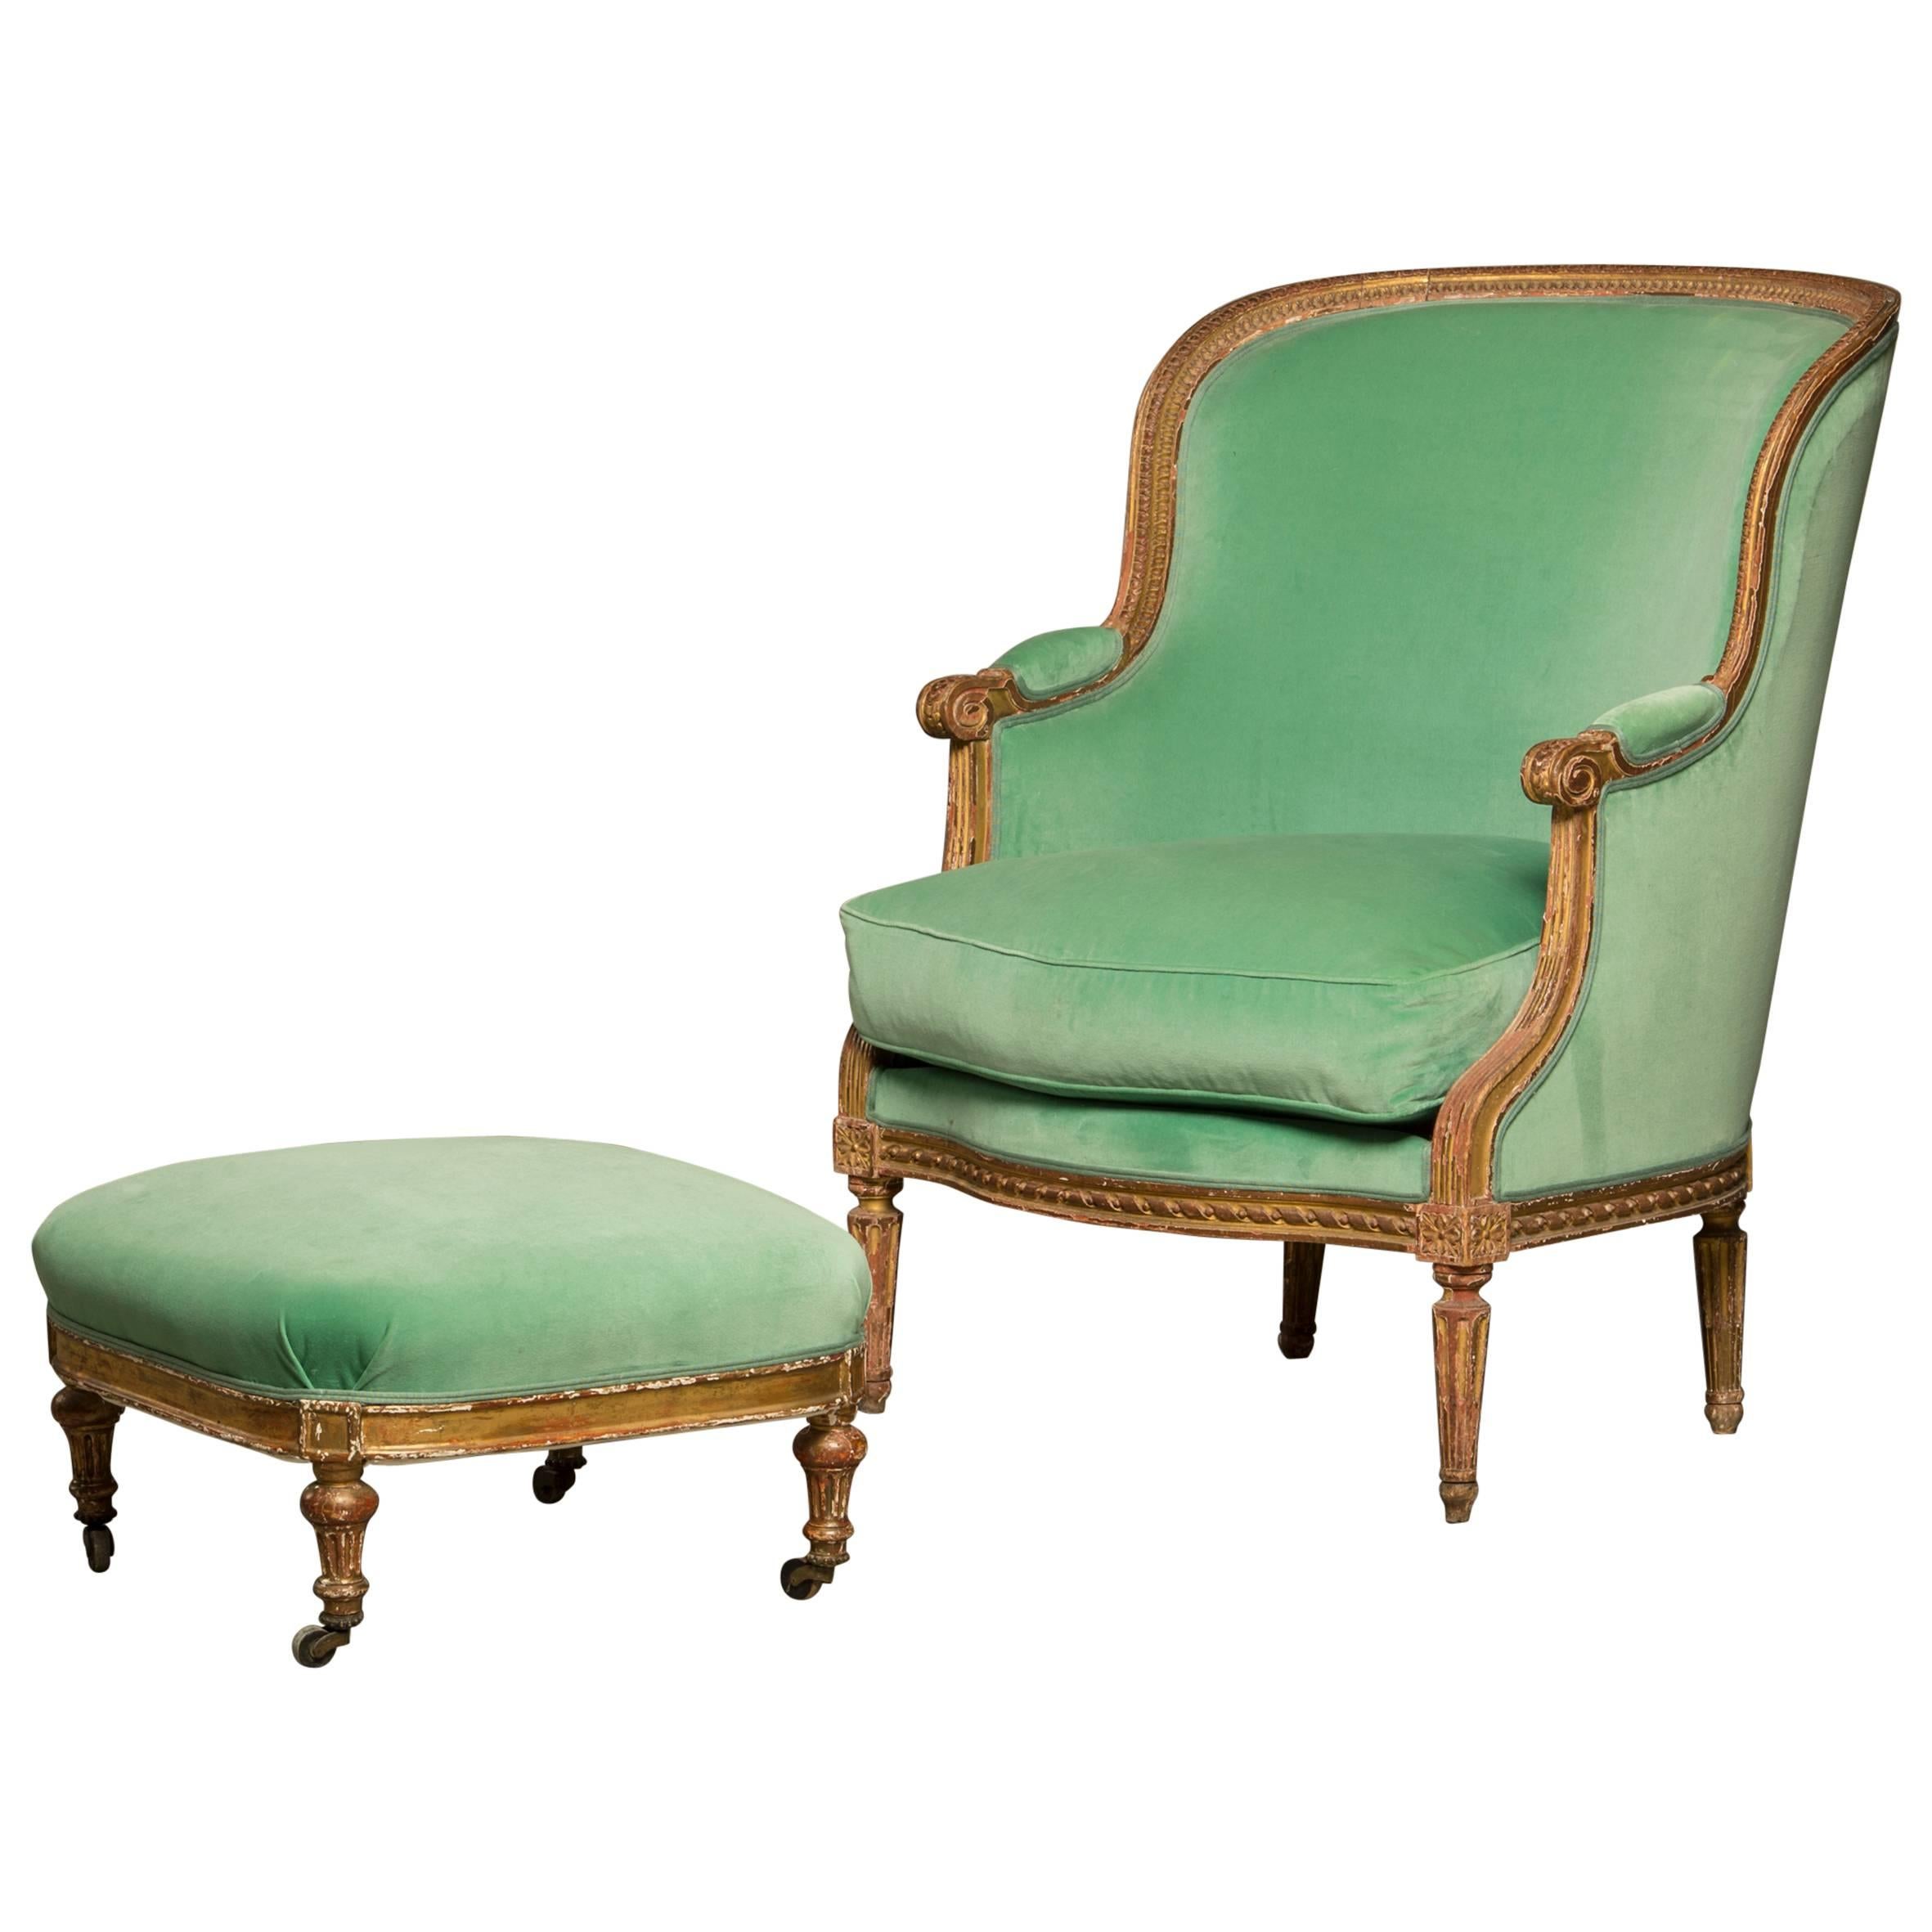 Large French Bergere Chair in Louis XVI Style with Matching Footstool